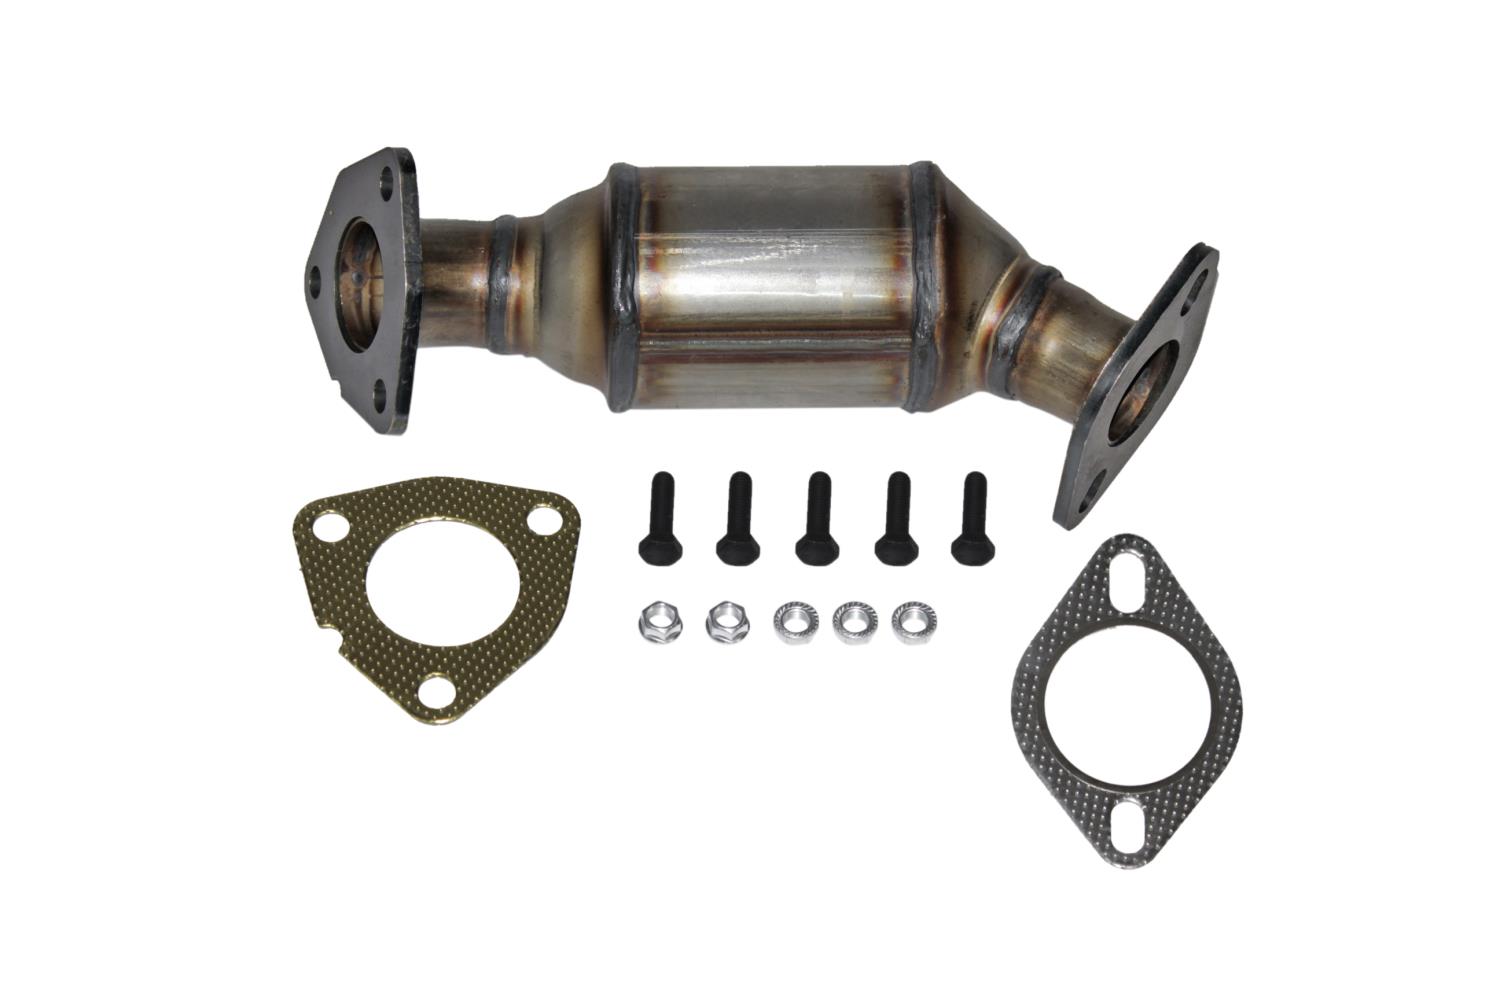 Catalytic Converter Fits Select 2007-2017 Buick, Chevrolet, GMC & Saturn Models w/3.6L V6 Eng. [Front Right]